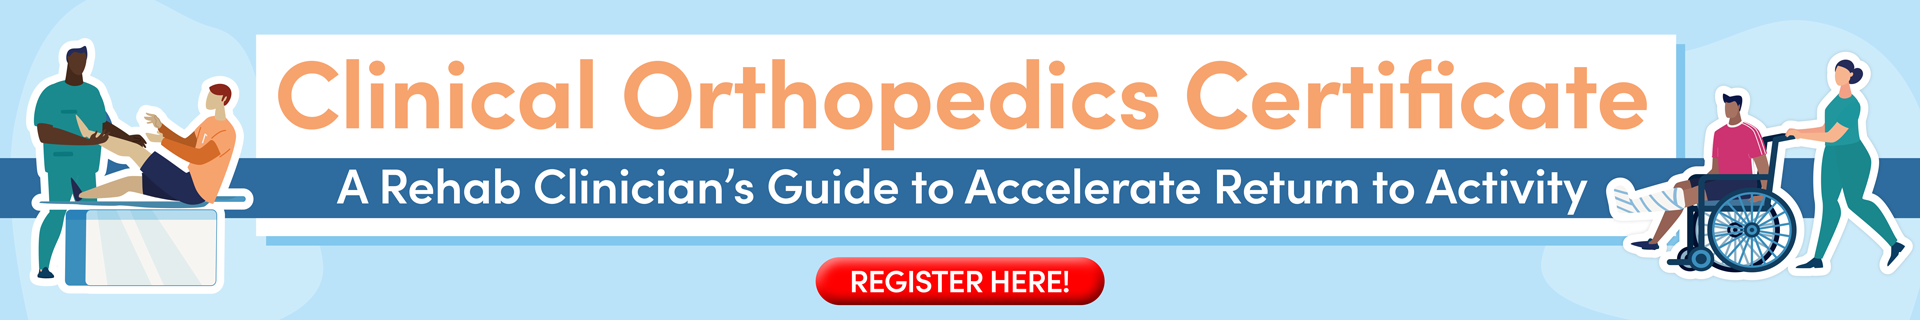 Clinical Orthopedics Certificate: A Rehab Clinician’s Guide to Accelerate Return to Activity